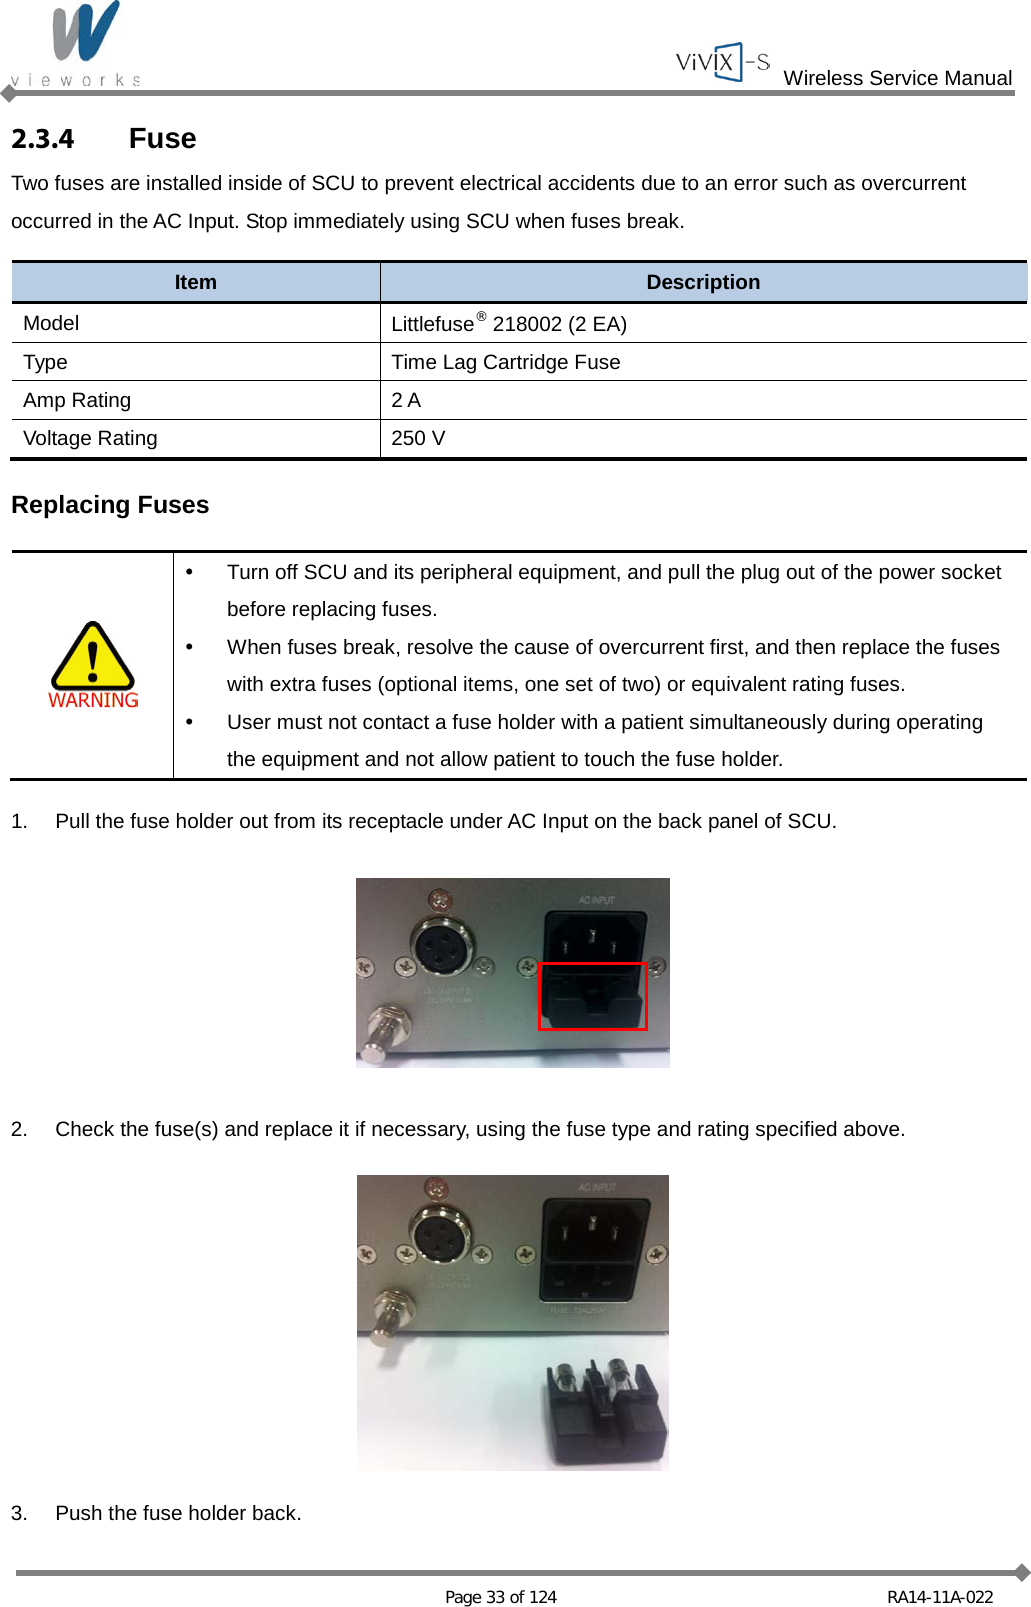  Wireless Service Manual   Page 33 of 124 RA14-11A-022 2.3.4 Fuse Two fuses are installed inside of SCU to prevent electrical accidents due to an error such as overcurrent occurred in the AC Input. Stop immediately using SCU when fuses break.  Item Description Model Littlefuse® 218002 (2 EA) Type Time Lag Cartridge Fuse Amp Rating 2 A Voltage Rating 250 V  Replacing Fuses    Turn off SCU and its peripheral equipment, and pull the plug out of the power socket before replacing fuses.  When fuses break, resolve the cause of overcurrent first, and then replace the fuses with extra fuses (optional items, one set of two) or equivalent rating fuses.   User must not contact a fuse holder with a patient simultaneously during operating the equipment and not allow patient to touch the fuse holder.  1. Pull the fuse holder out from its receptacle under AC Input on the back panel of SCU.    2. Check the fuse(s) and replace it if necessary, using the fuse type and rating specified above.    3. Push the fuse holder back. 